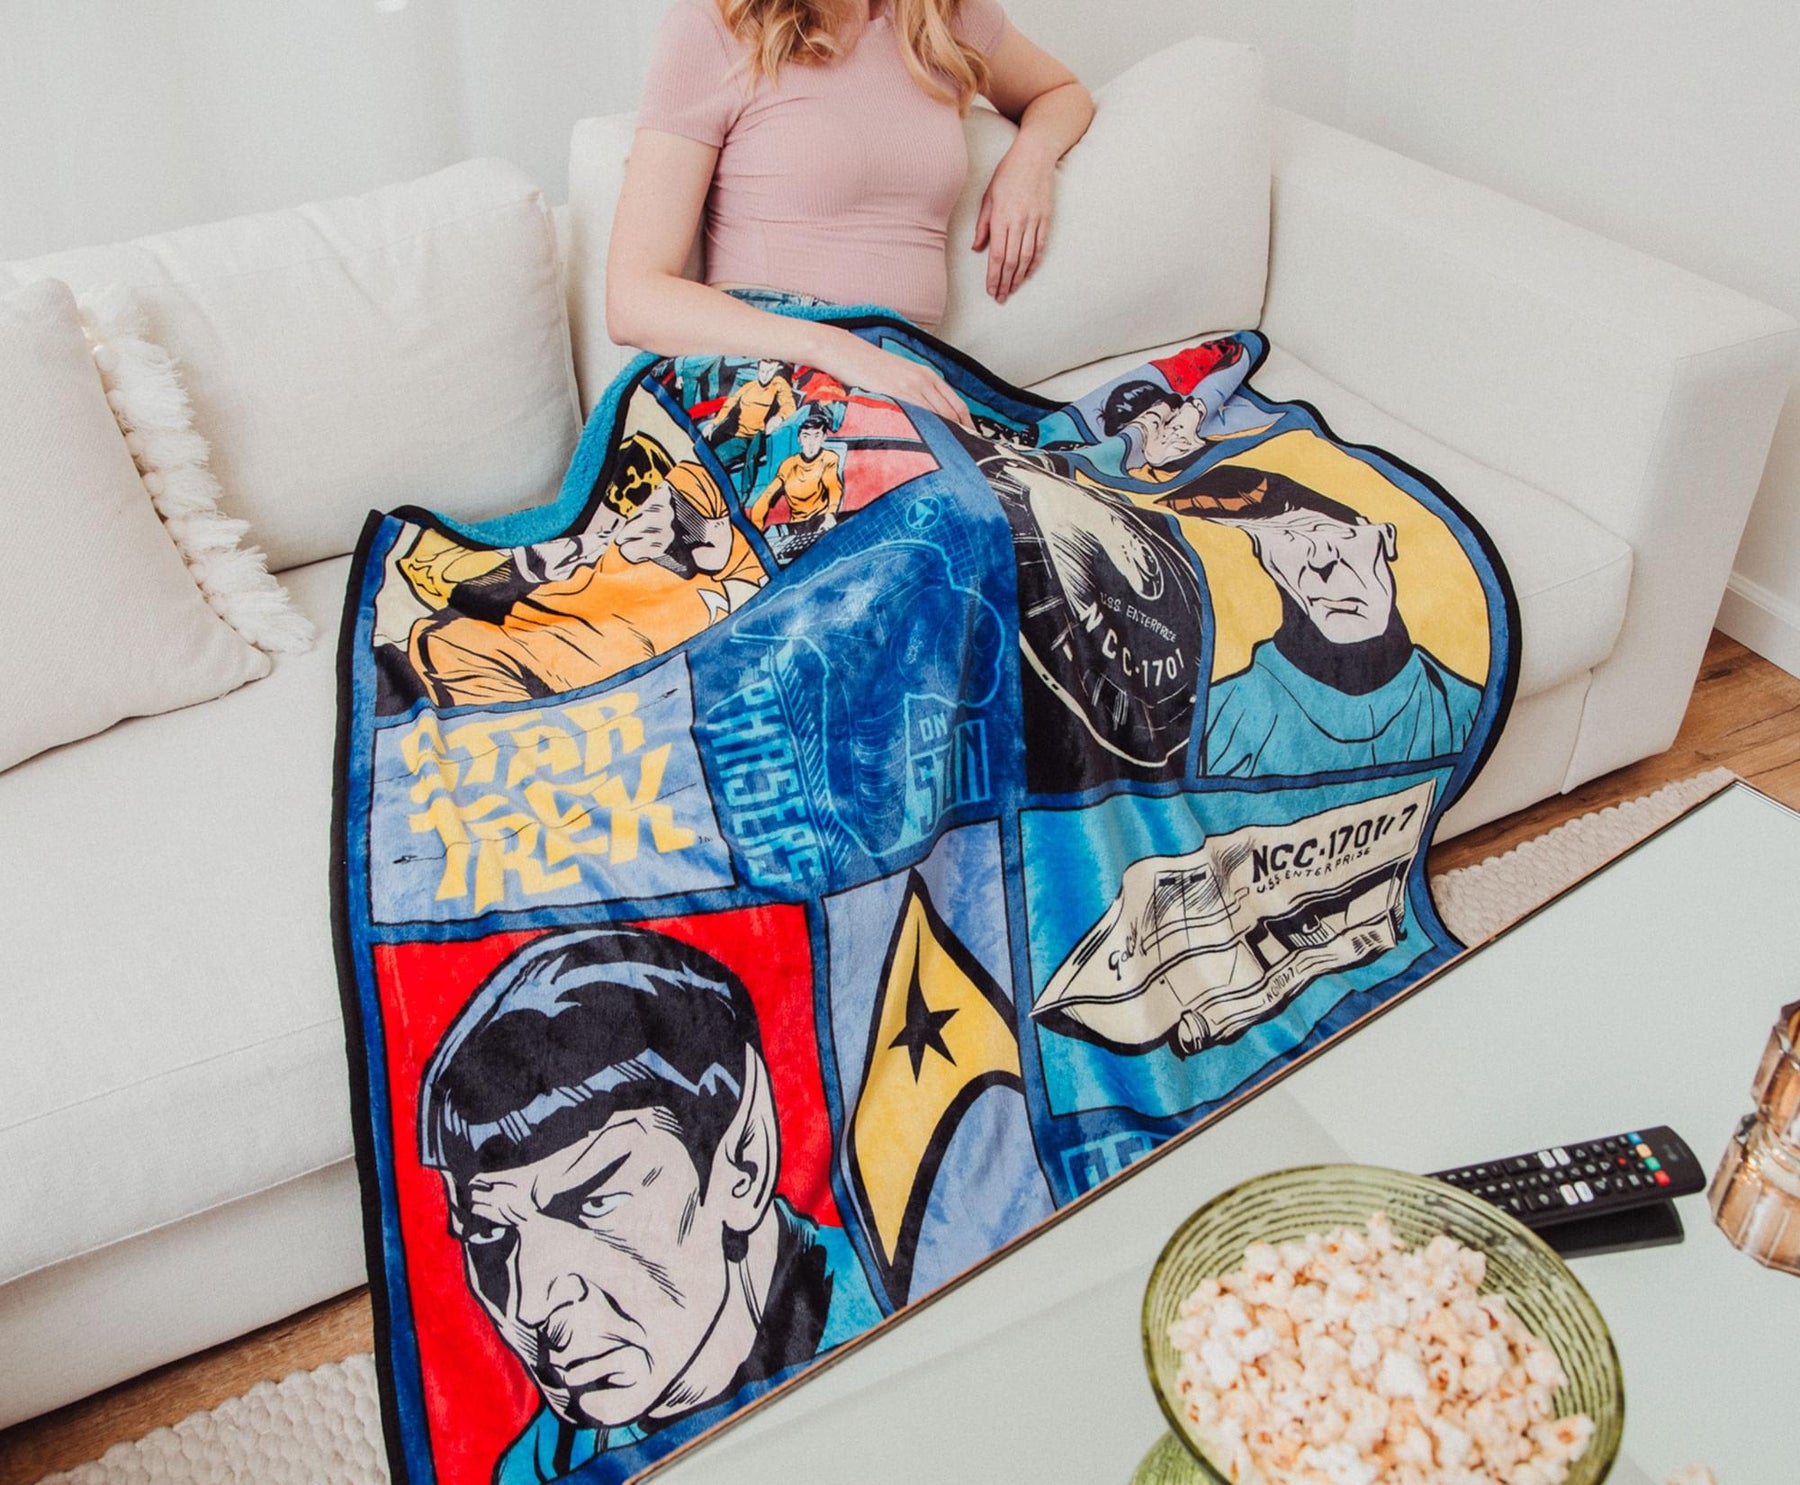 Star Trek: The Animated Series Comic Panel Throw Blanket | 50 x 60 Inches